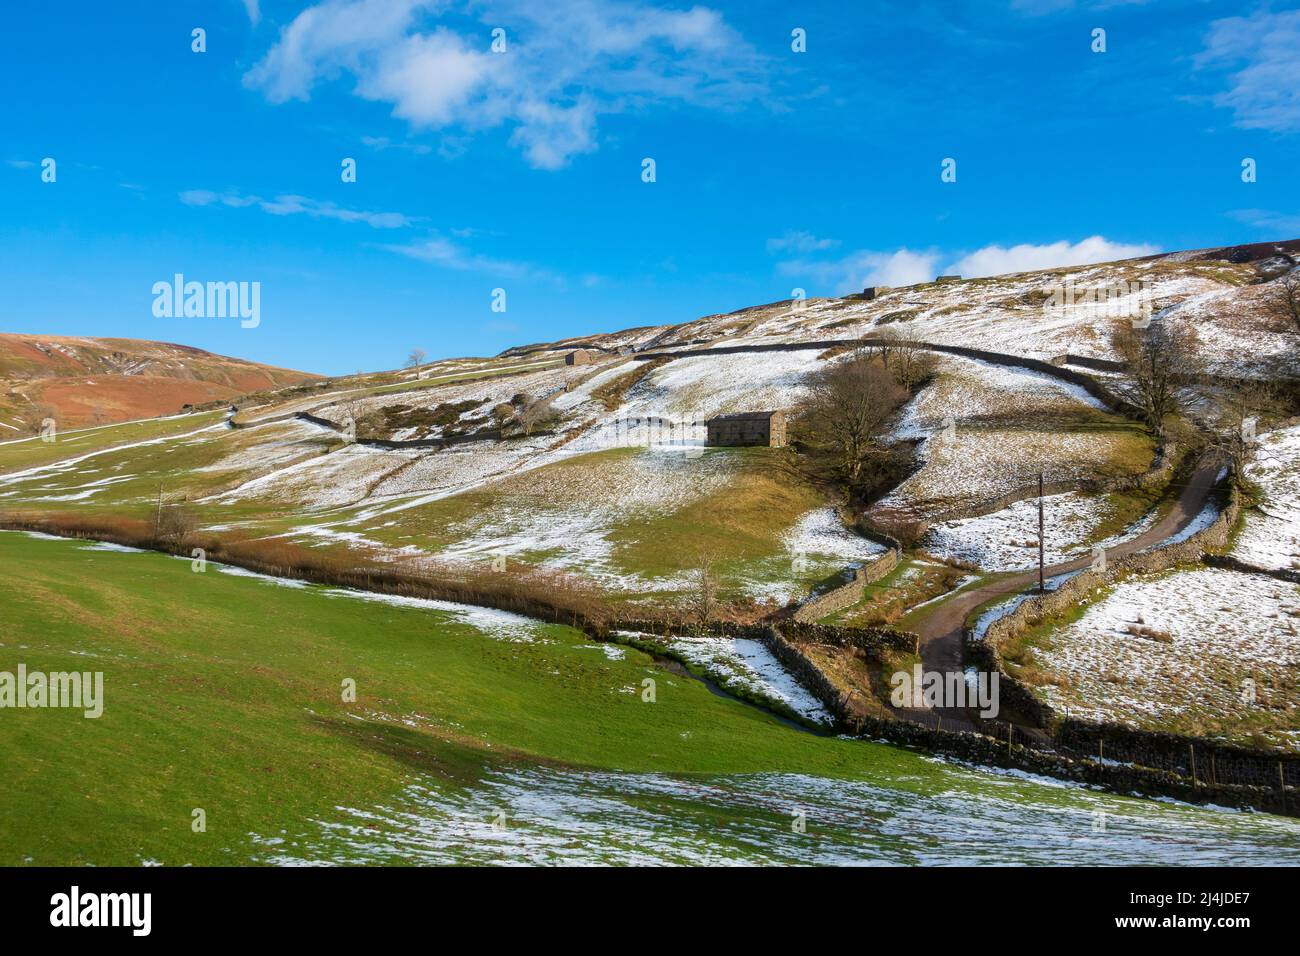 Fienile in pietra e colline innevate a Swaledale, Yorkshire Dales National Park. Foto Stock